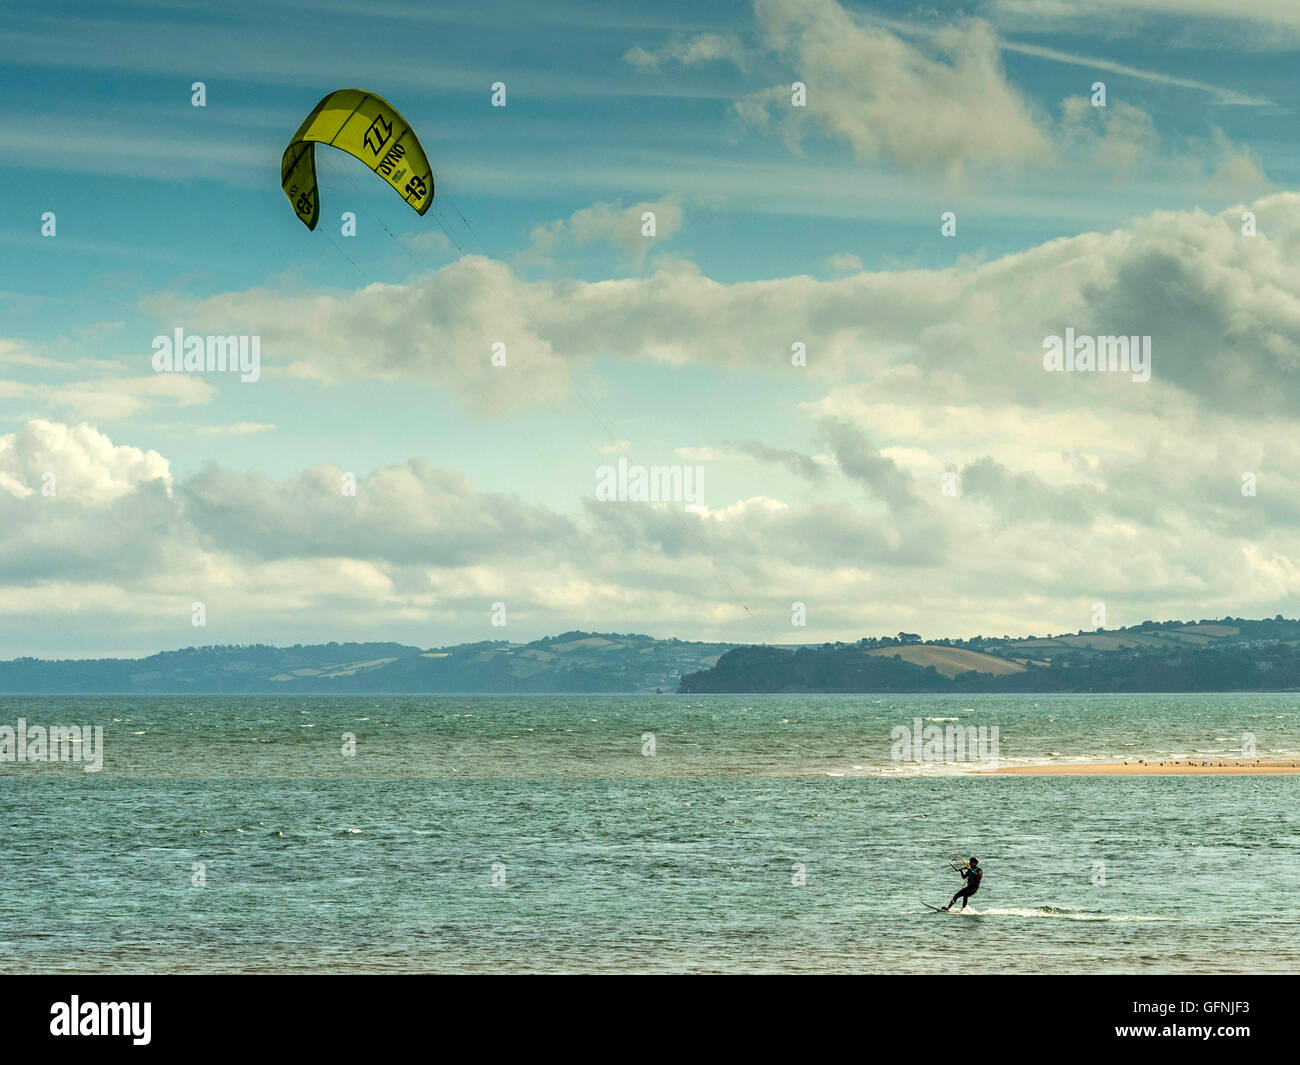 Kite surfing along the beautiful Jurassic seaside coast around the mouth of the River Exe estuary, with blue sea and sky. Stock Photo